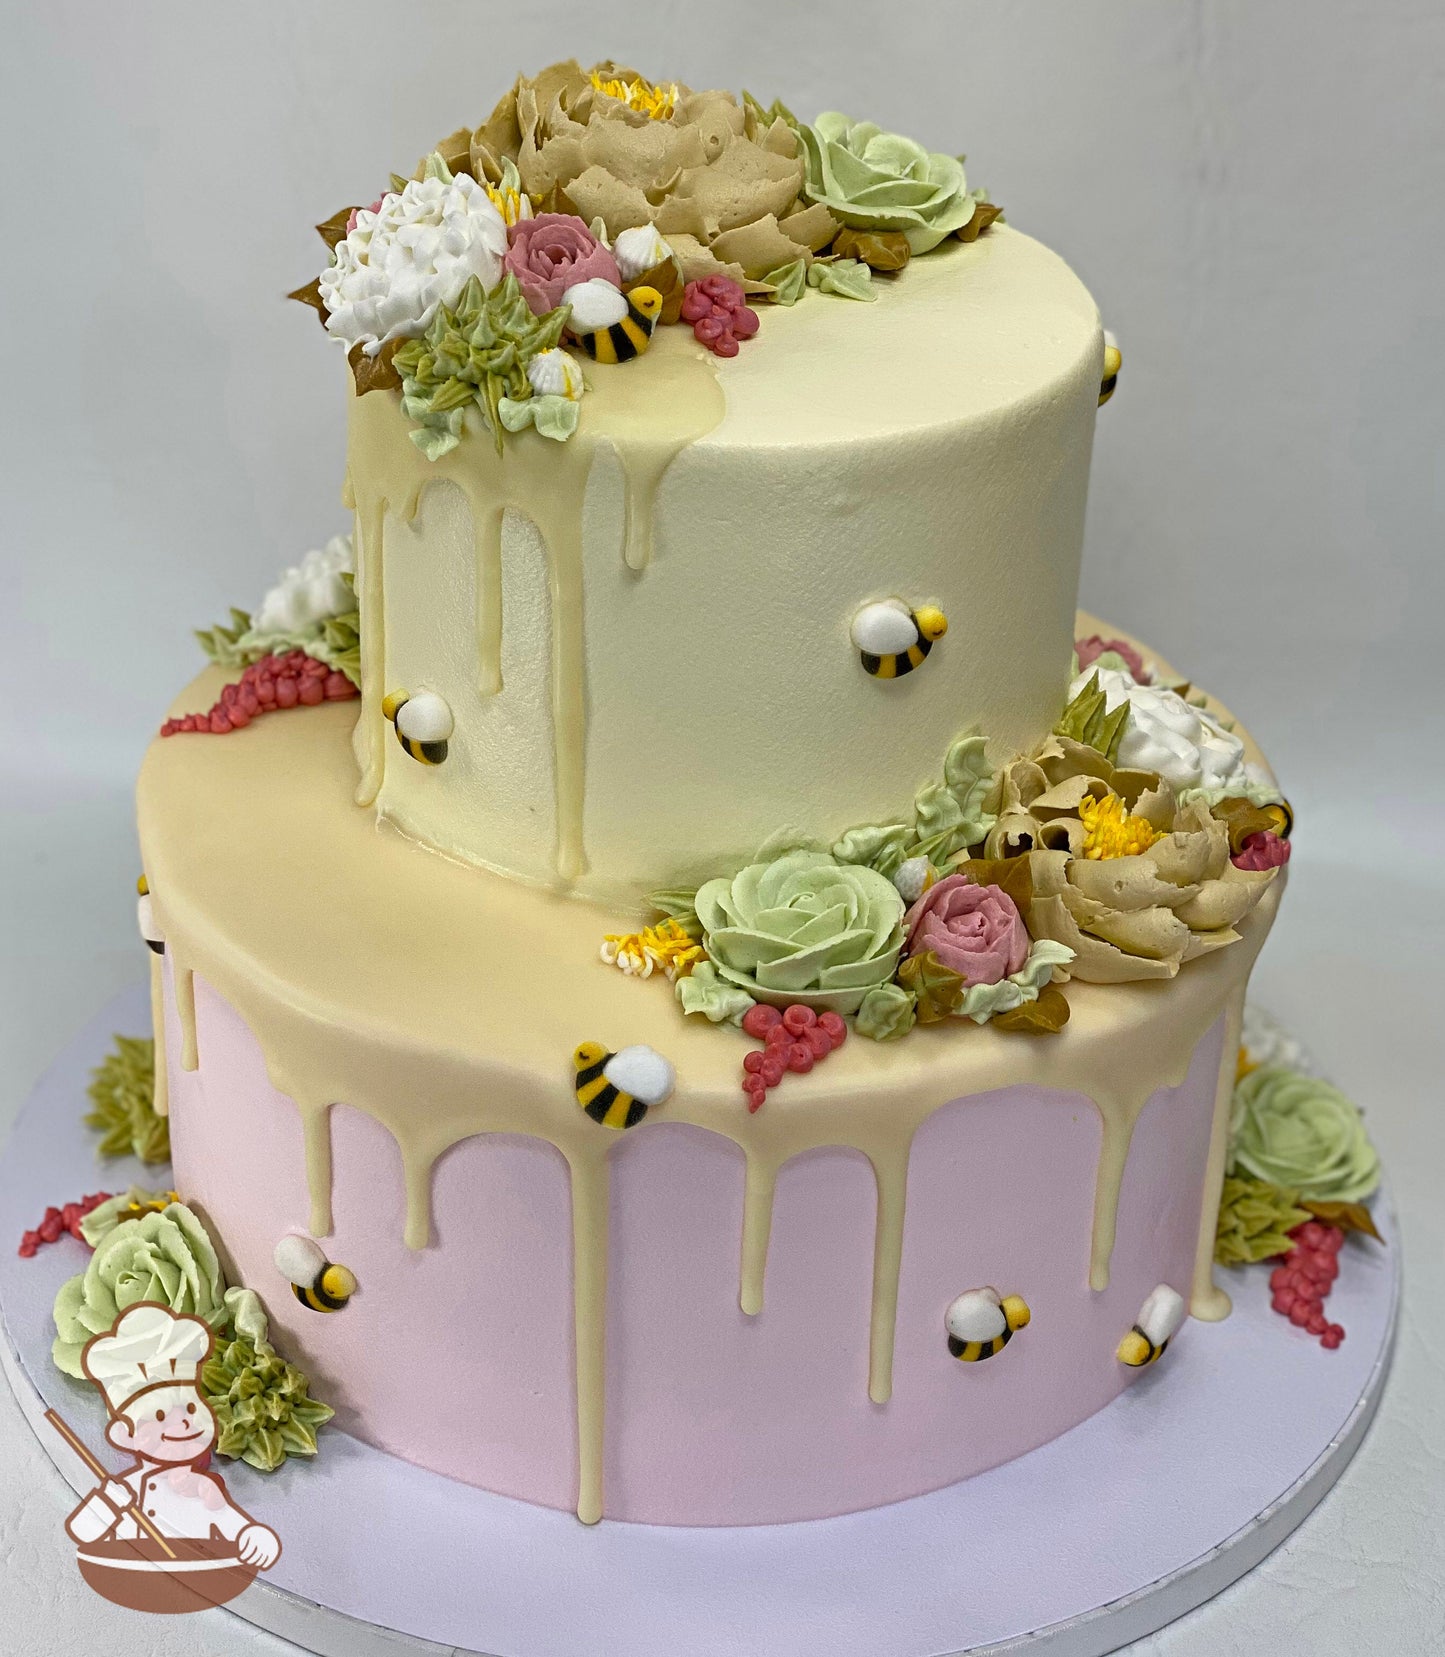 Cake decorated with pink icing on the bottom tier and yellow icing on the top tier. The cake also has buttercream flowers, bees and yellow drip.